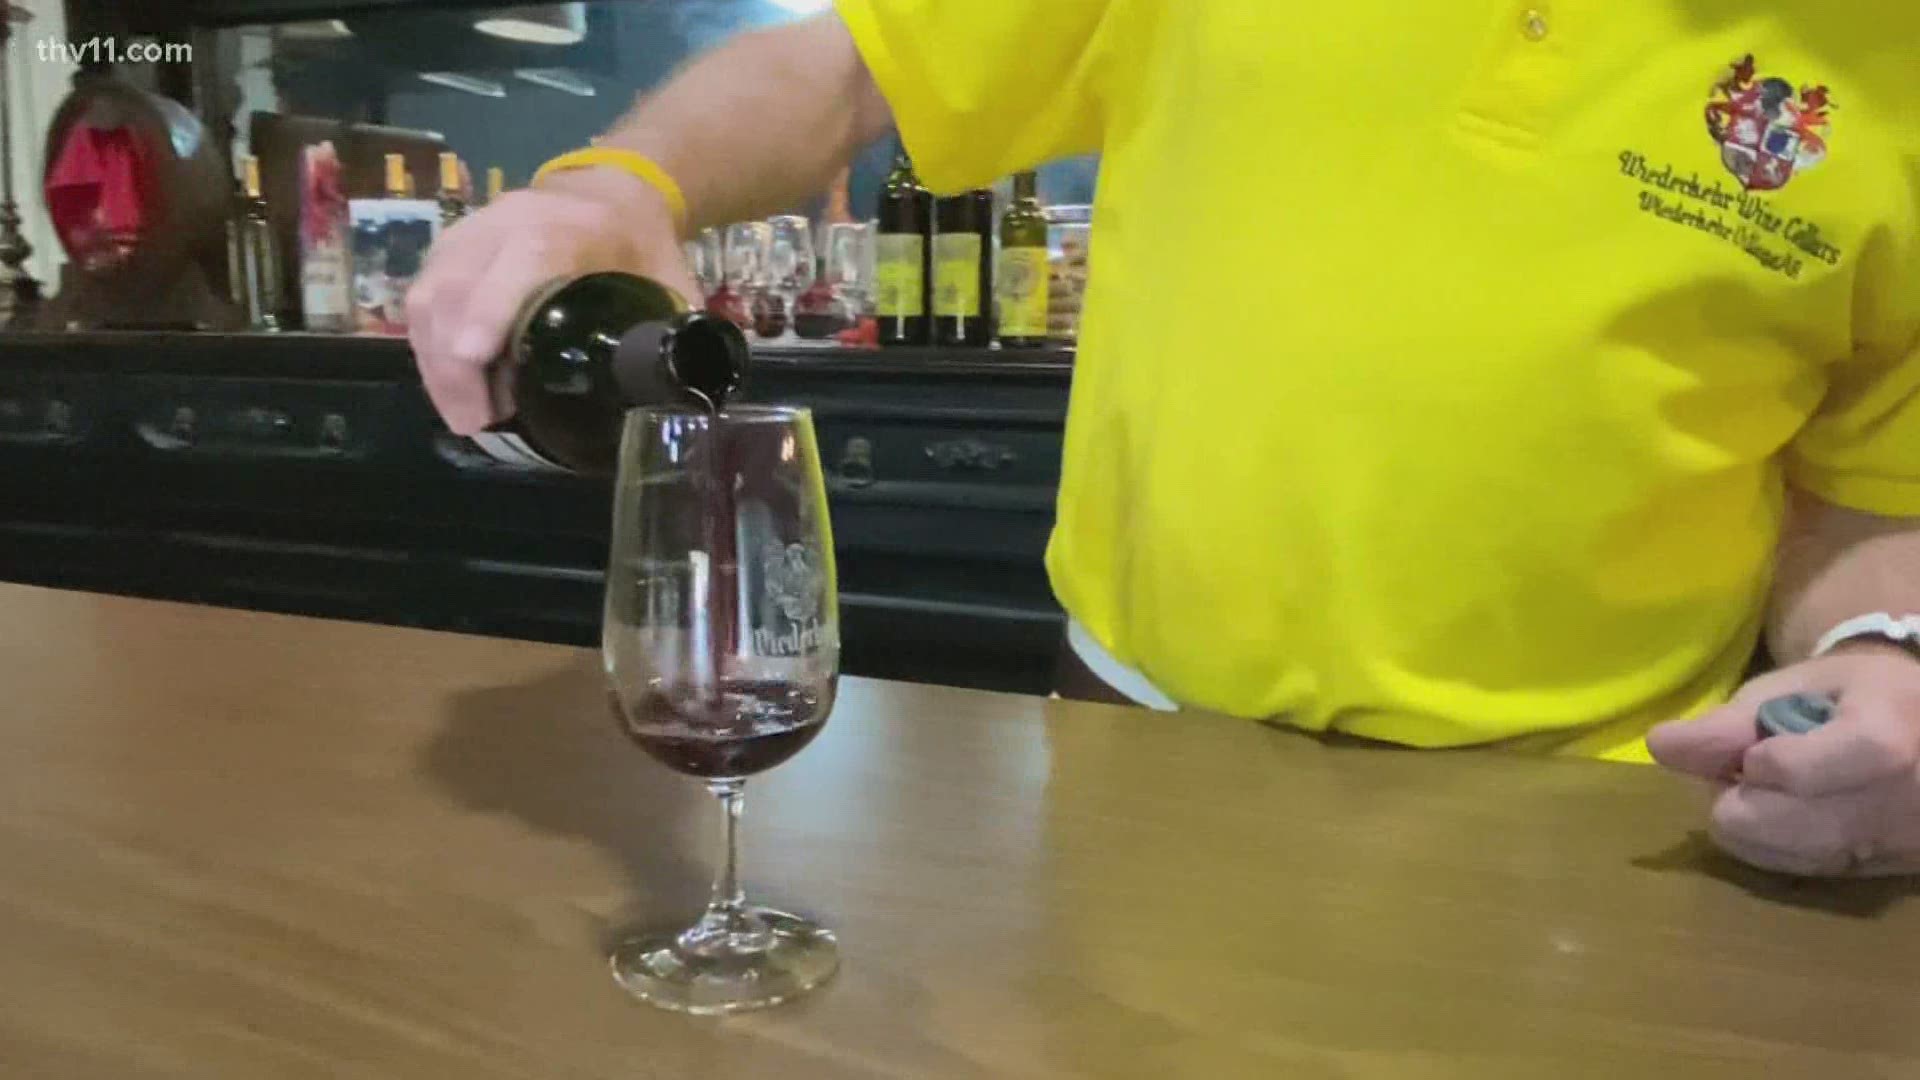 Ashley King takes us to Altus, where we discover the history of what is known as the "wine capitol" of Arkansas.